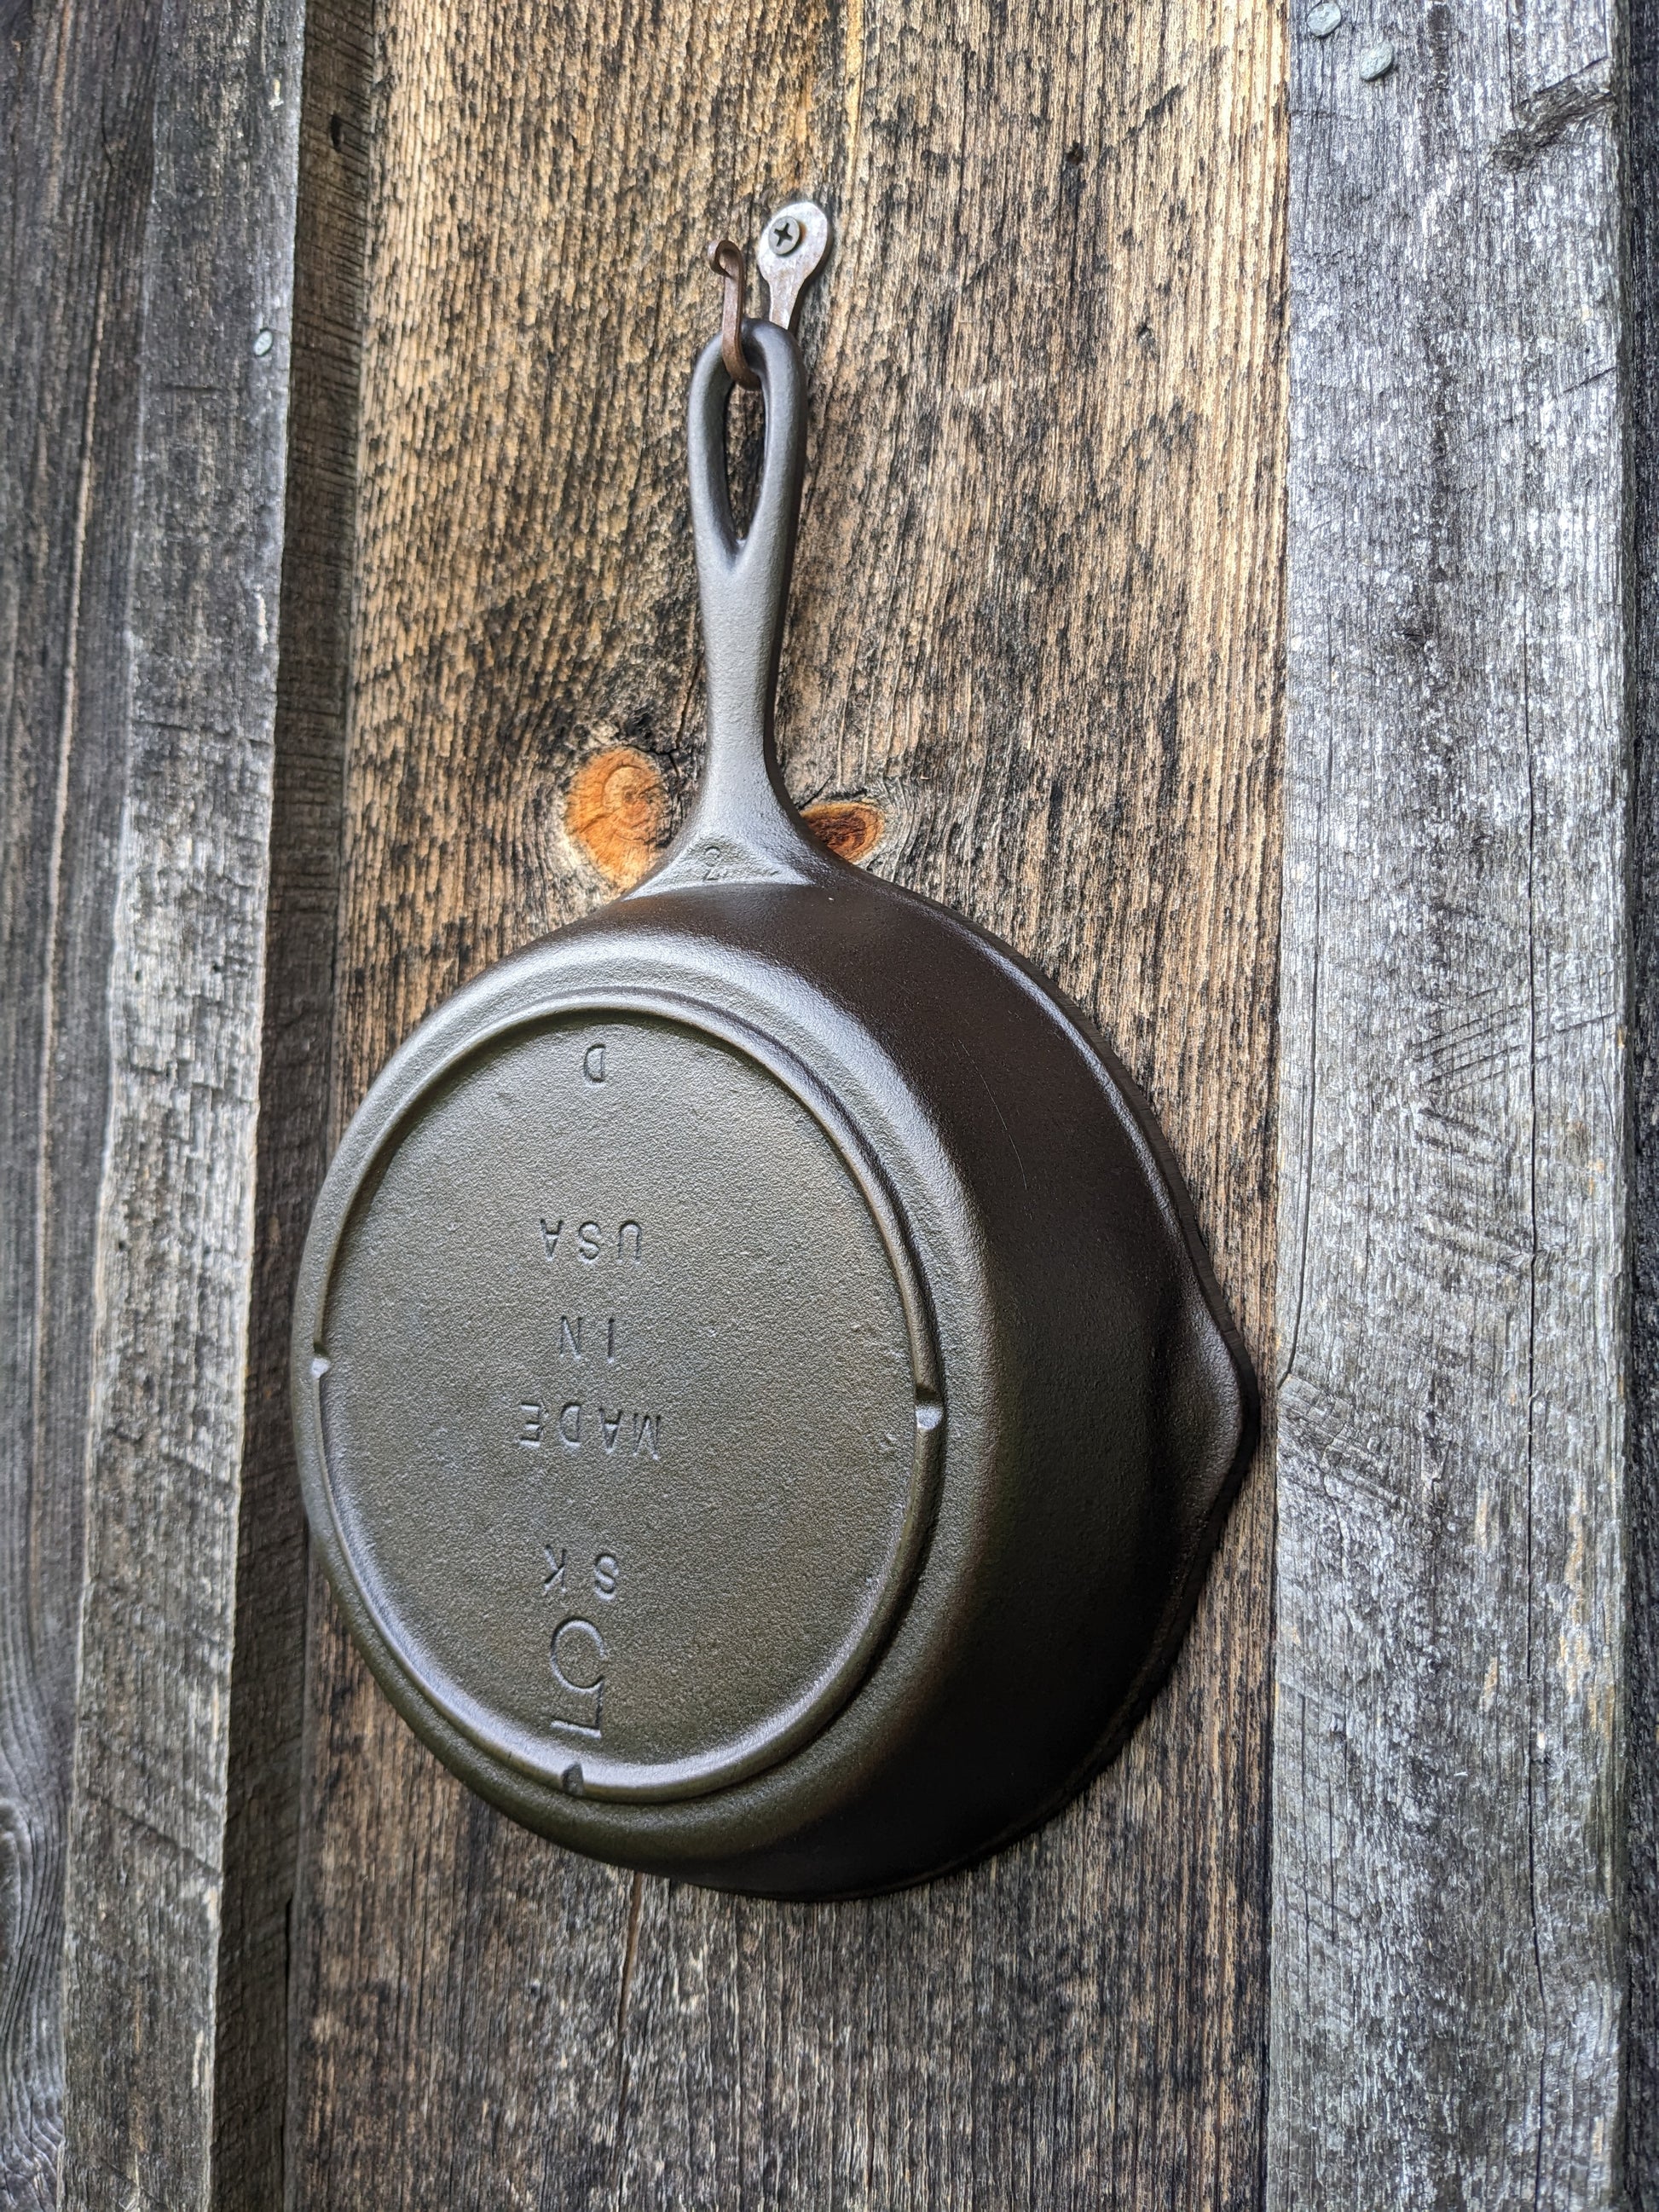 Lodge 10 SK, 3-notch Heat Ring, Cast Iron Skillet. Made in the USA.  Manufactured by Lodge in the 1970's. Excellent Condition 